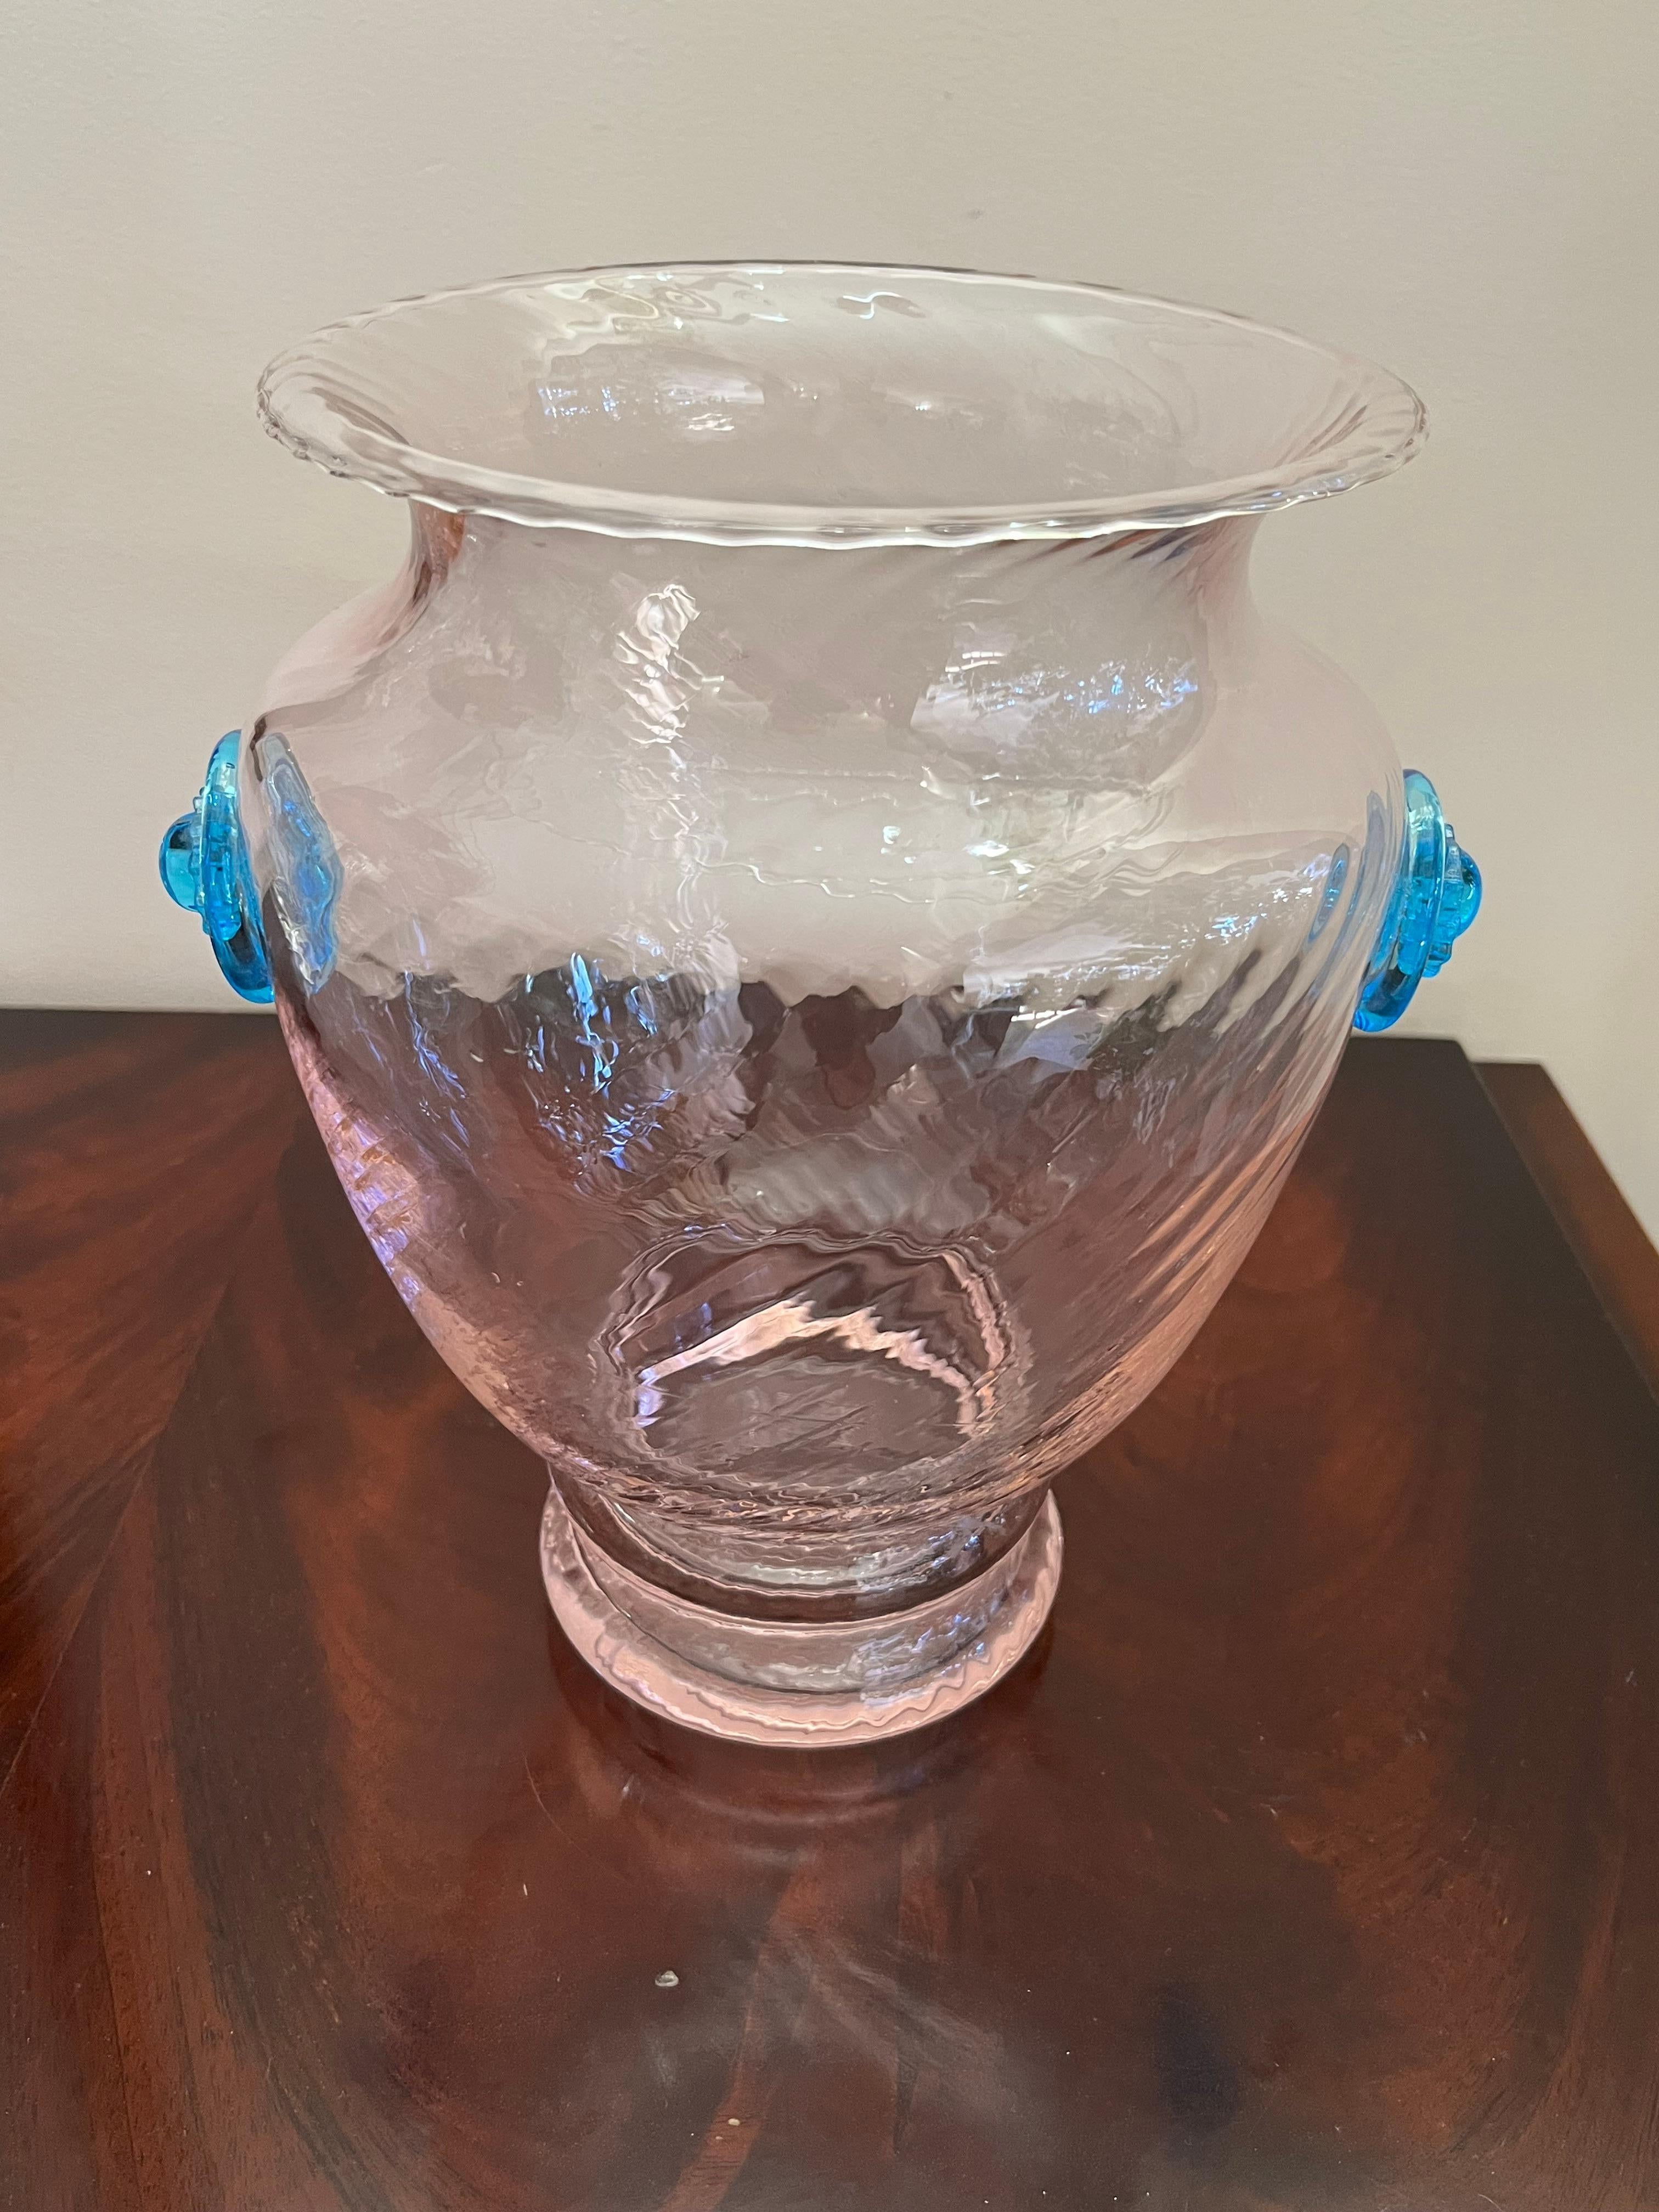 Colored Murano glass vase, Italy, 1980s
Purchased in one of the most prestigious retailers of fine objects in Venice. Intact. Excellent condition.